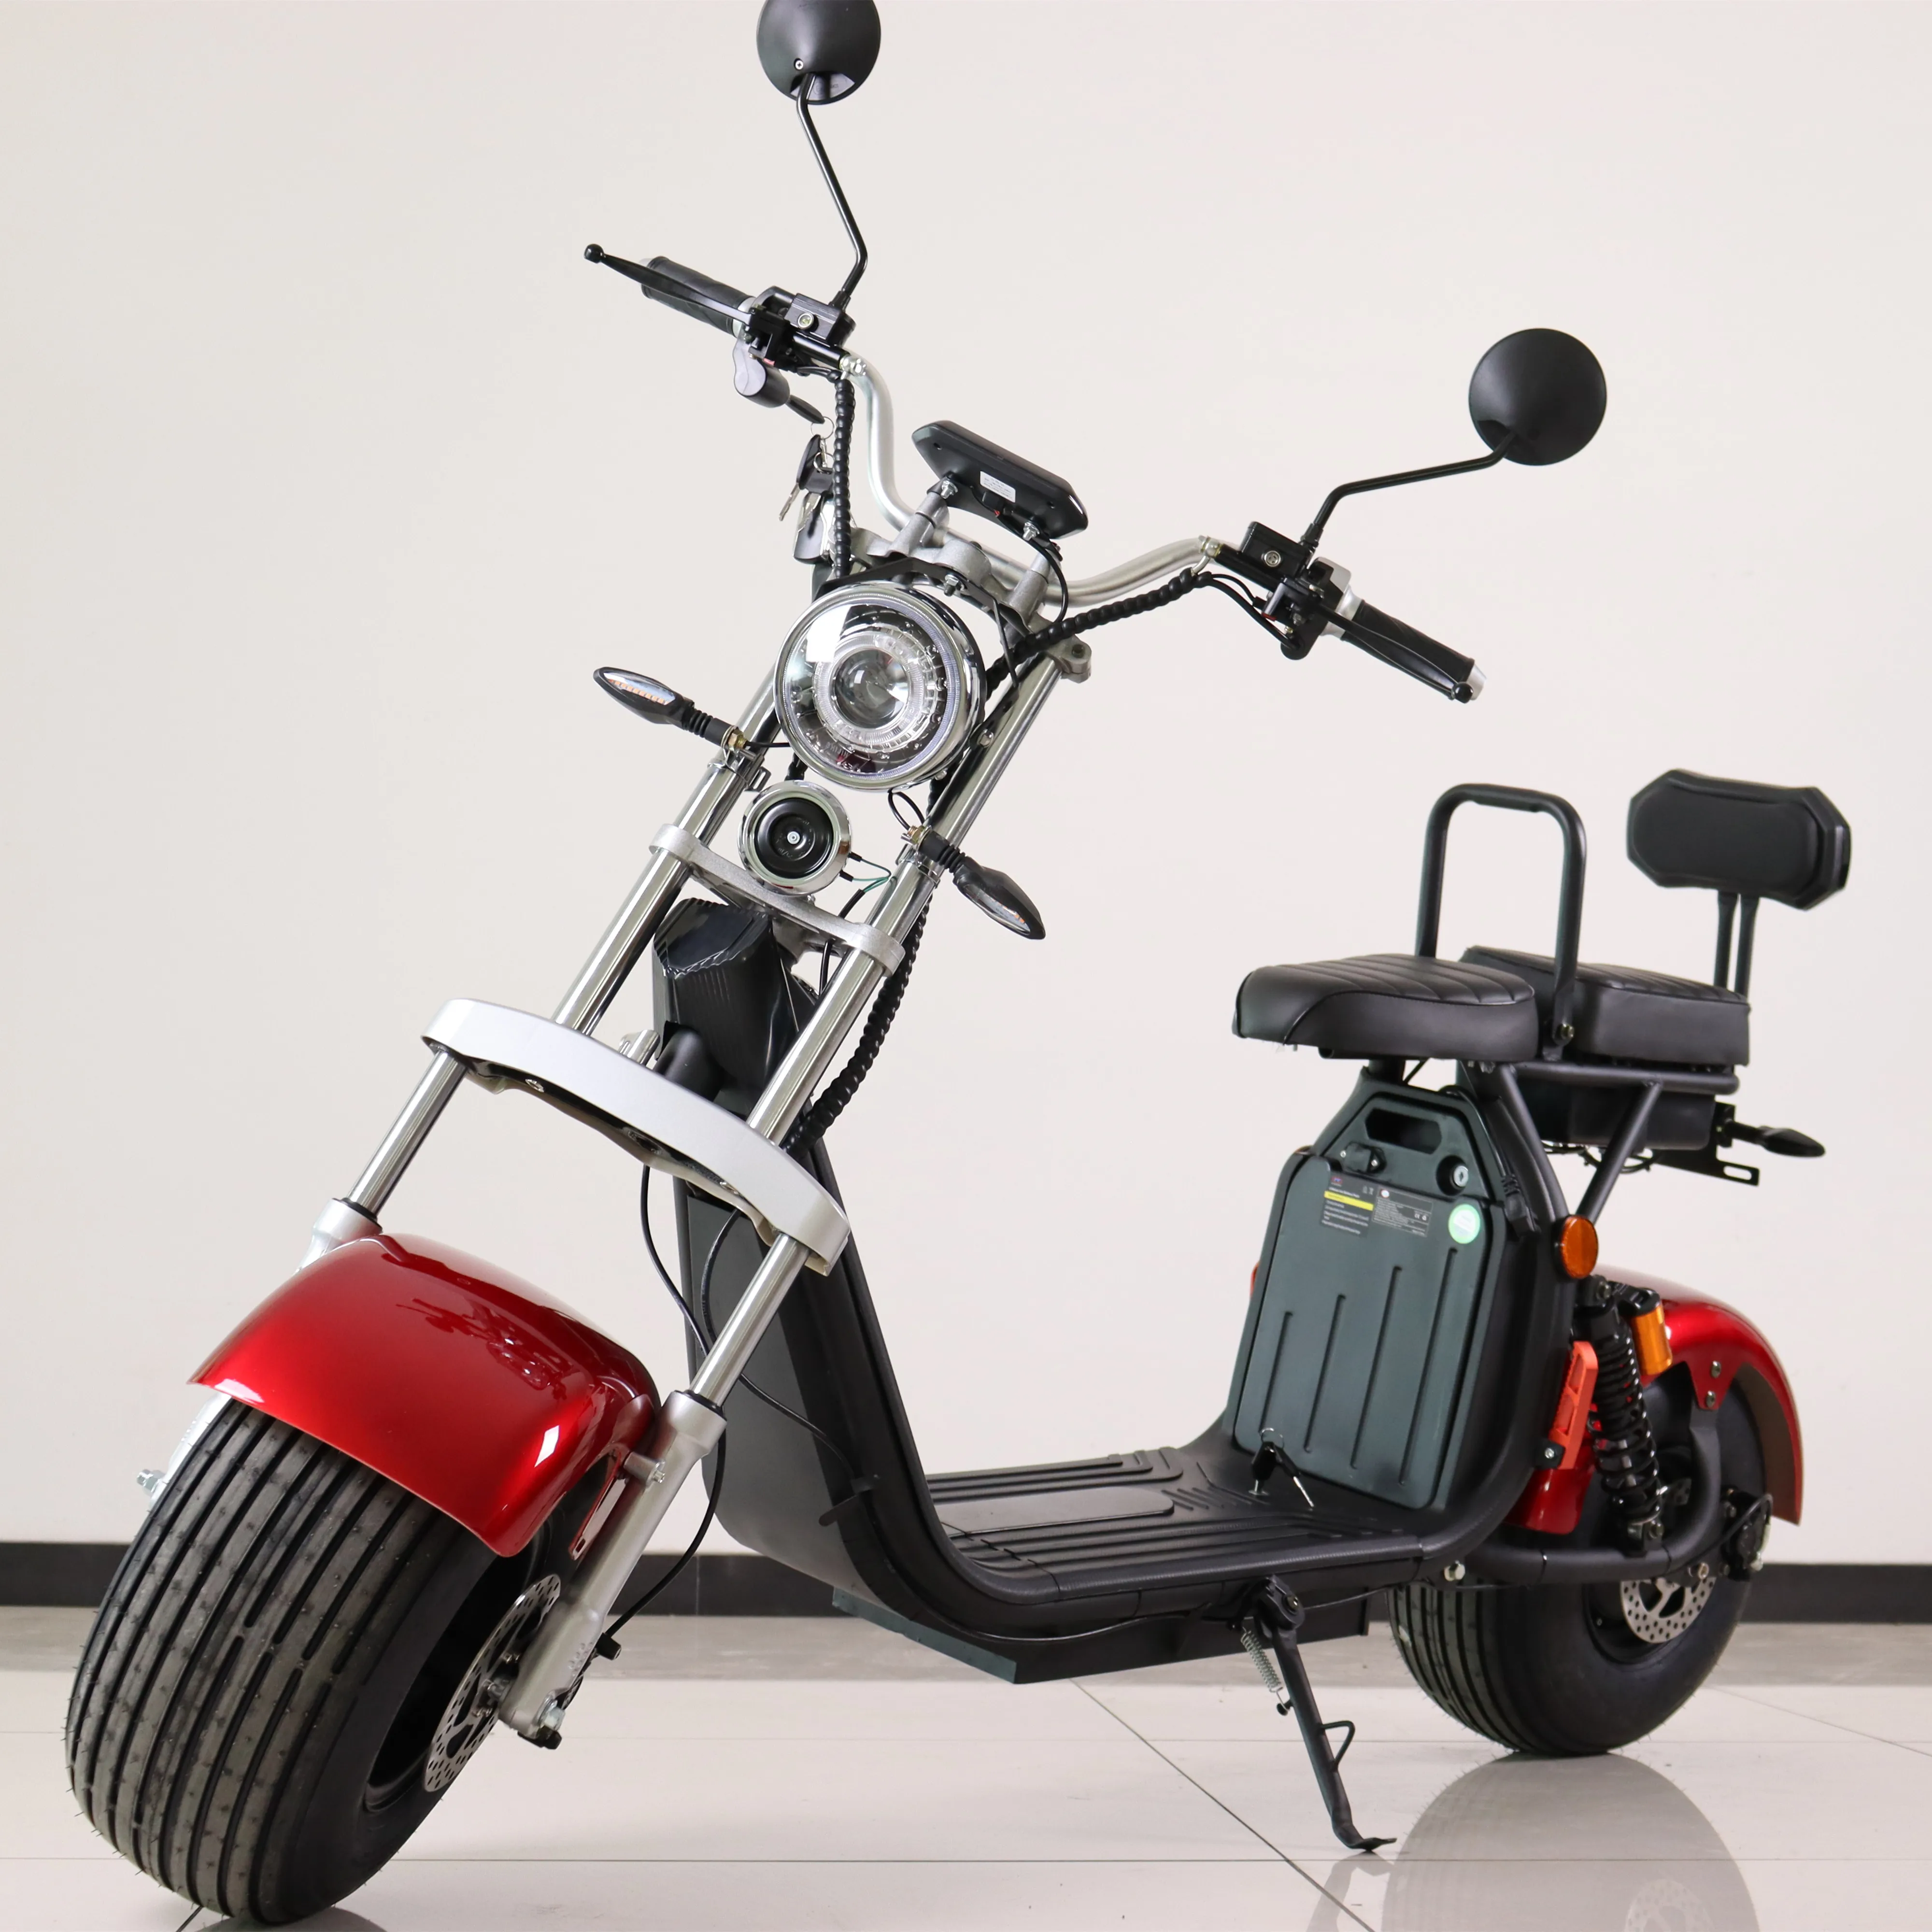 

2022 Hot china cheap 1500W 2000W 60V 20ah 40ah fat tire electric scooter eec coc citycoco scooter 60V 45km/h 60km/h